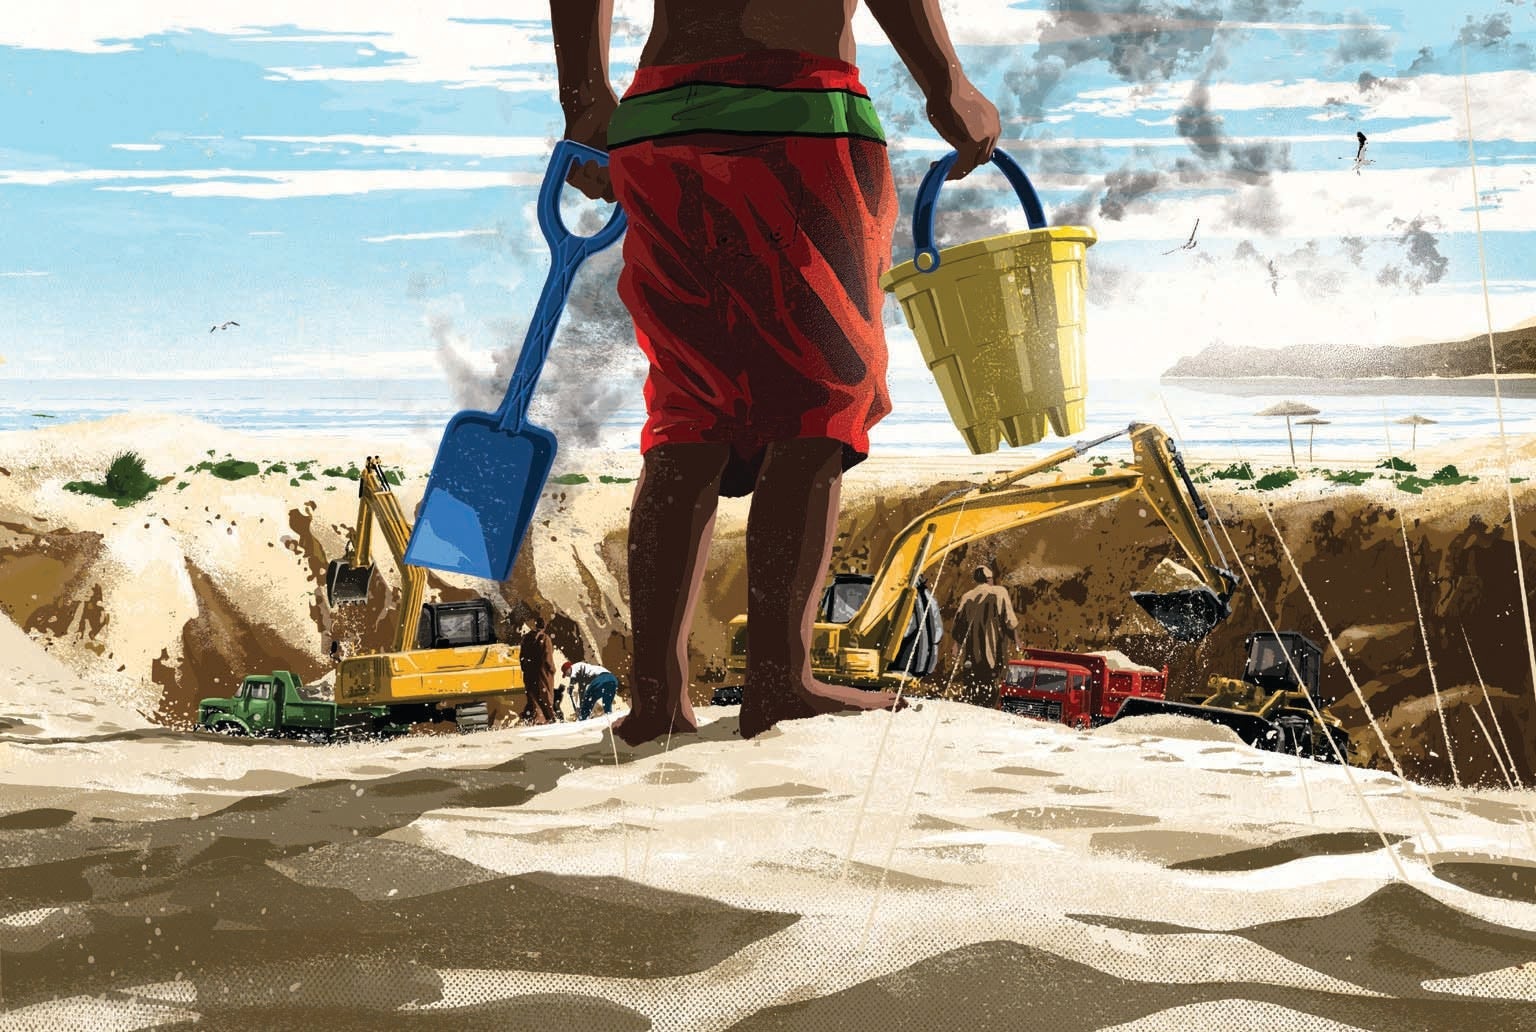 Illustration of a child playing with sand toys at the beach, looking down at a construction team on the beach.